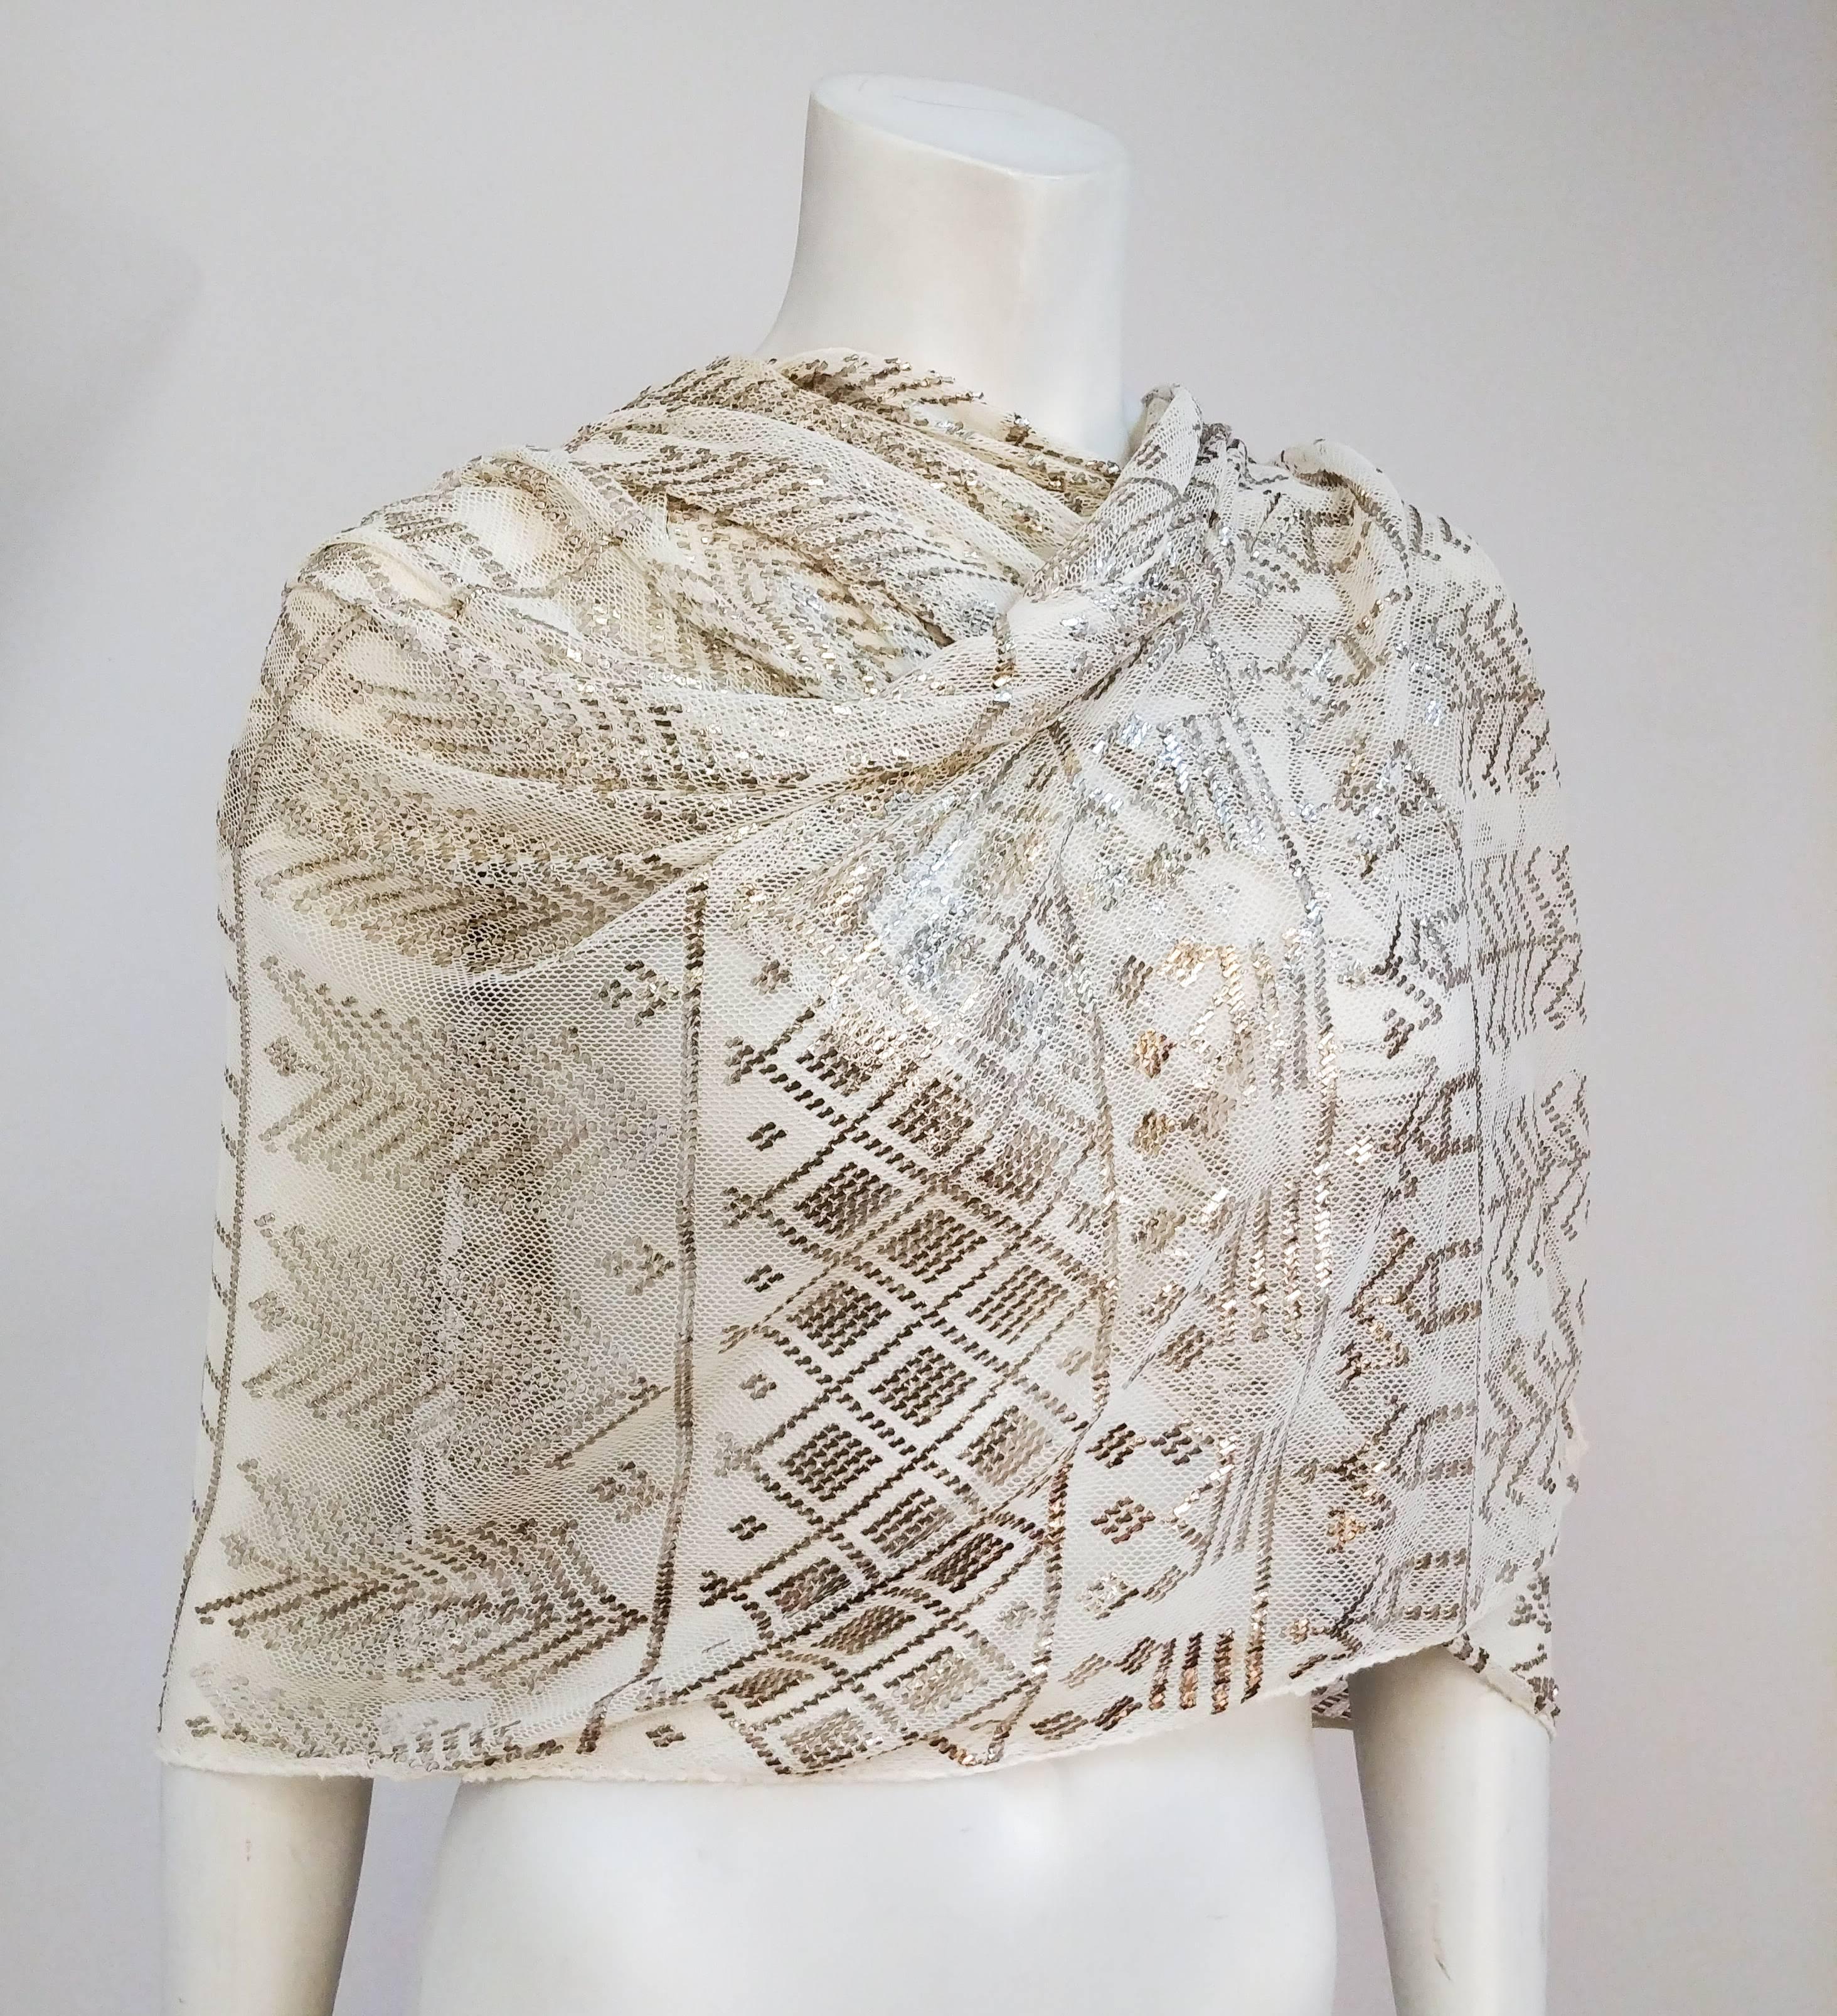 1920s Silver Assuit Shawl. White knit silver assuit shawl with geometric pattern. 